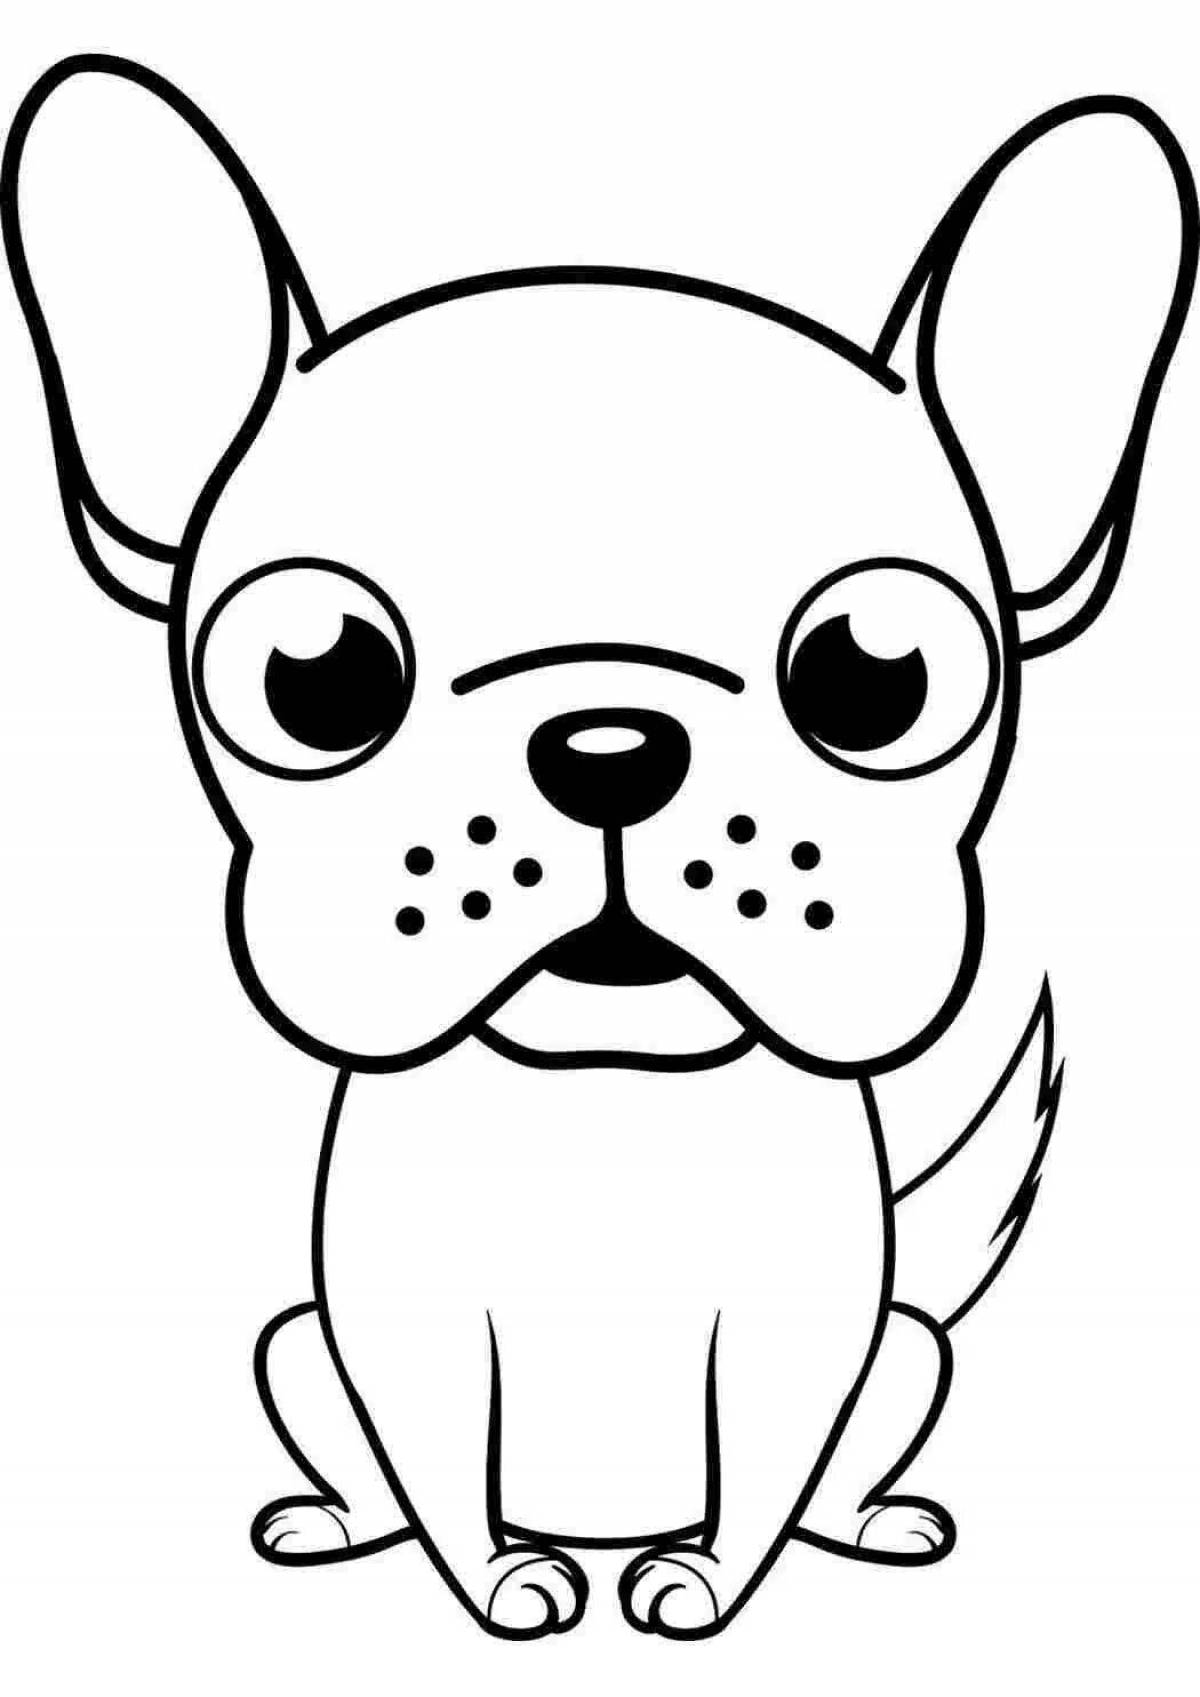 Coloring page playful little puppy